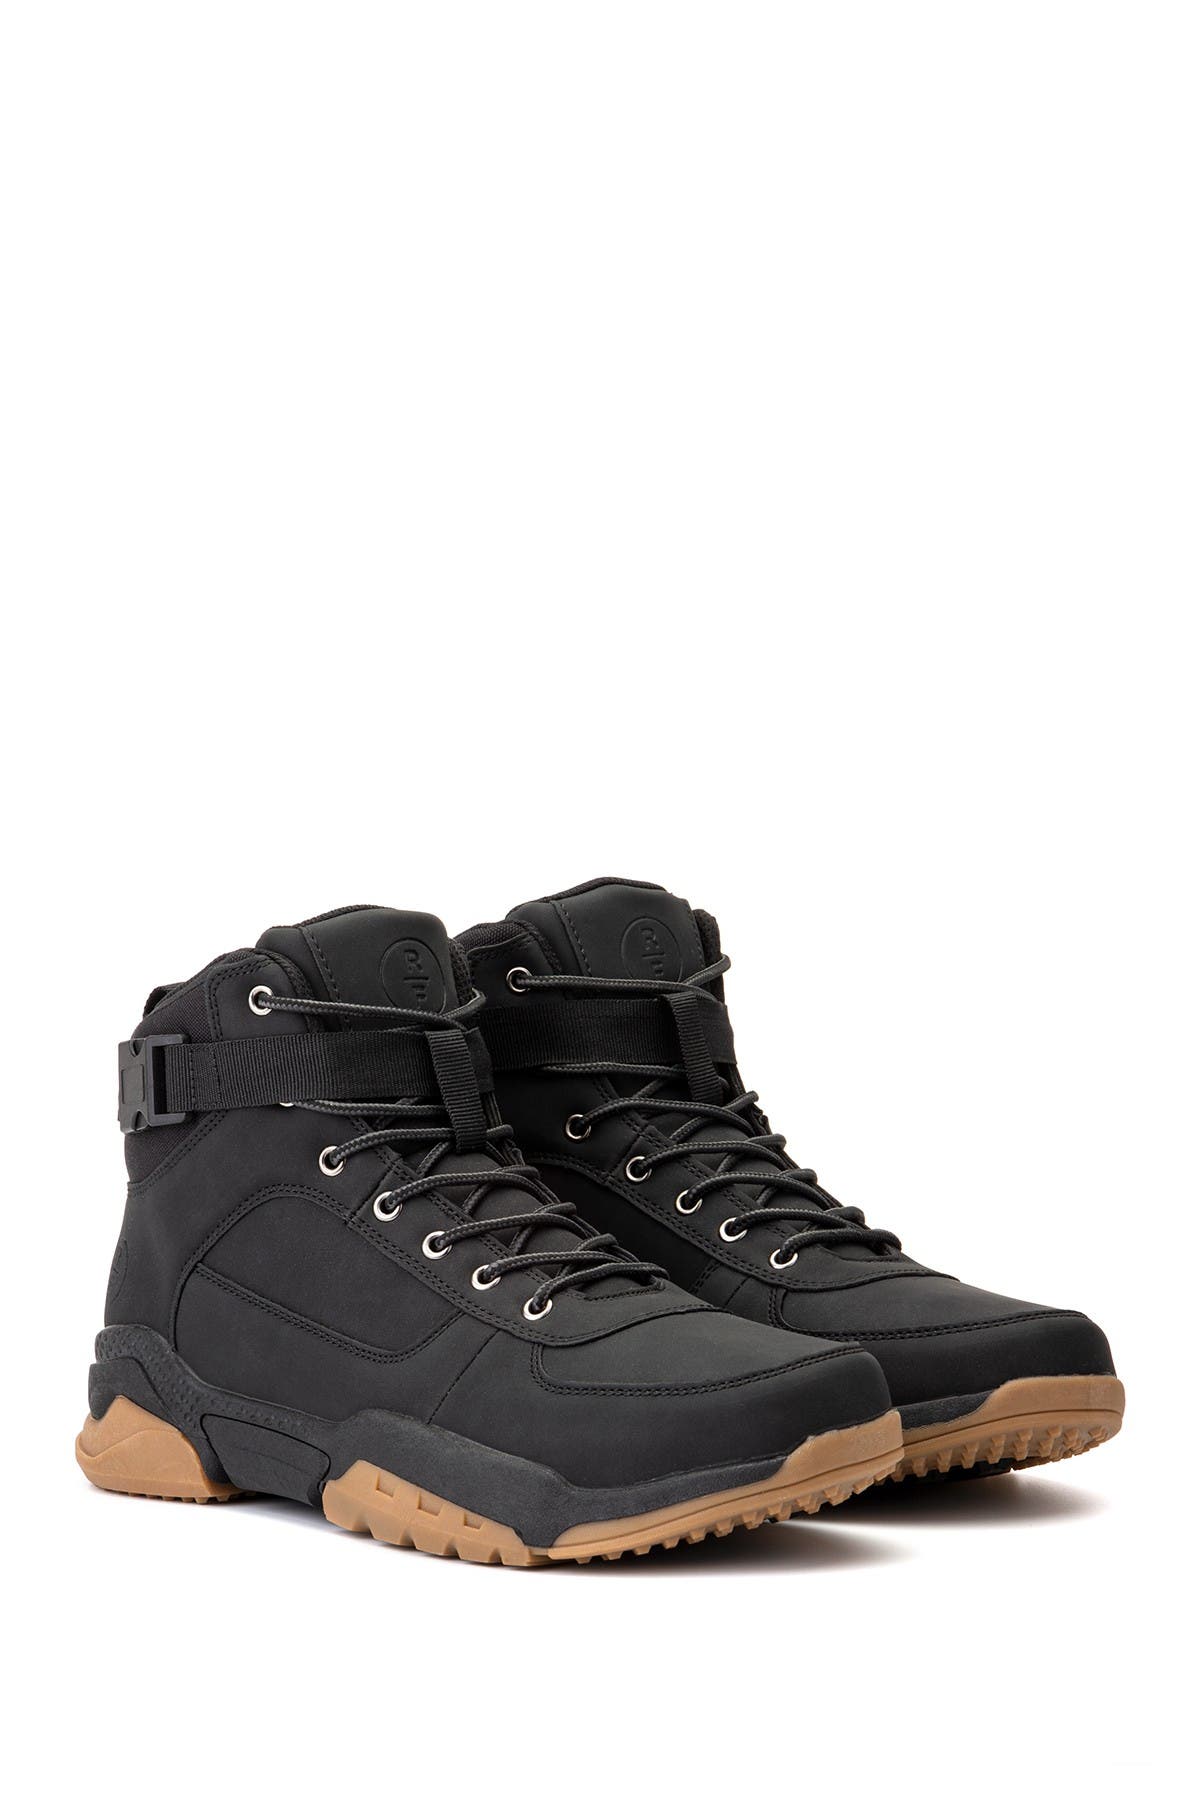 Reserved Footwear Preston Lace-up Boot In Black